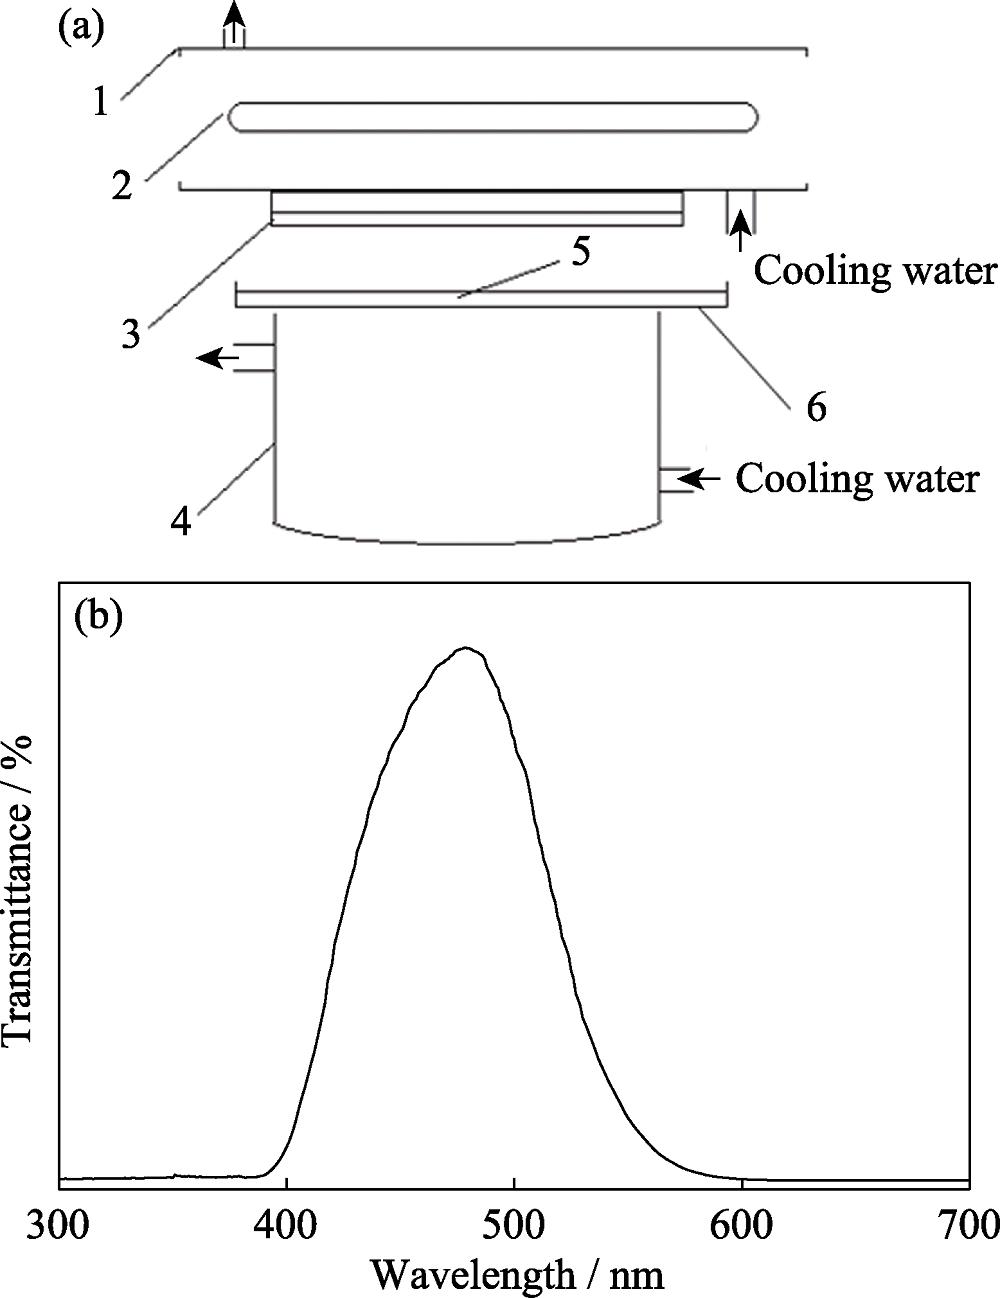 Schematic reactor for visible light photocatalytic degradation (a) and transmittance of the combined light filters (b)1: Cylindrical pyrex vessel; 2: Tungsten halogen lamp; 3: Cutoff filter; 4: Reactor; 5: Saturated cupric acetate solution; 6: Petri dish